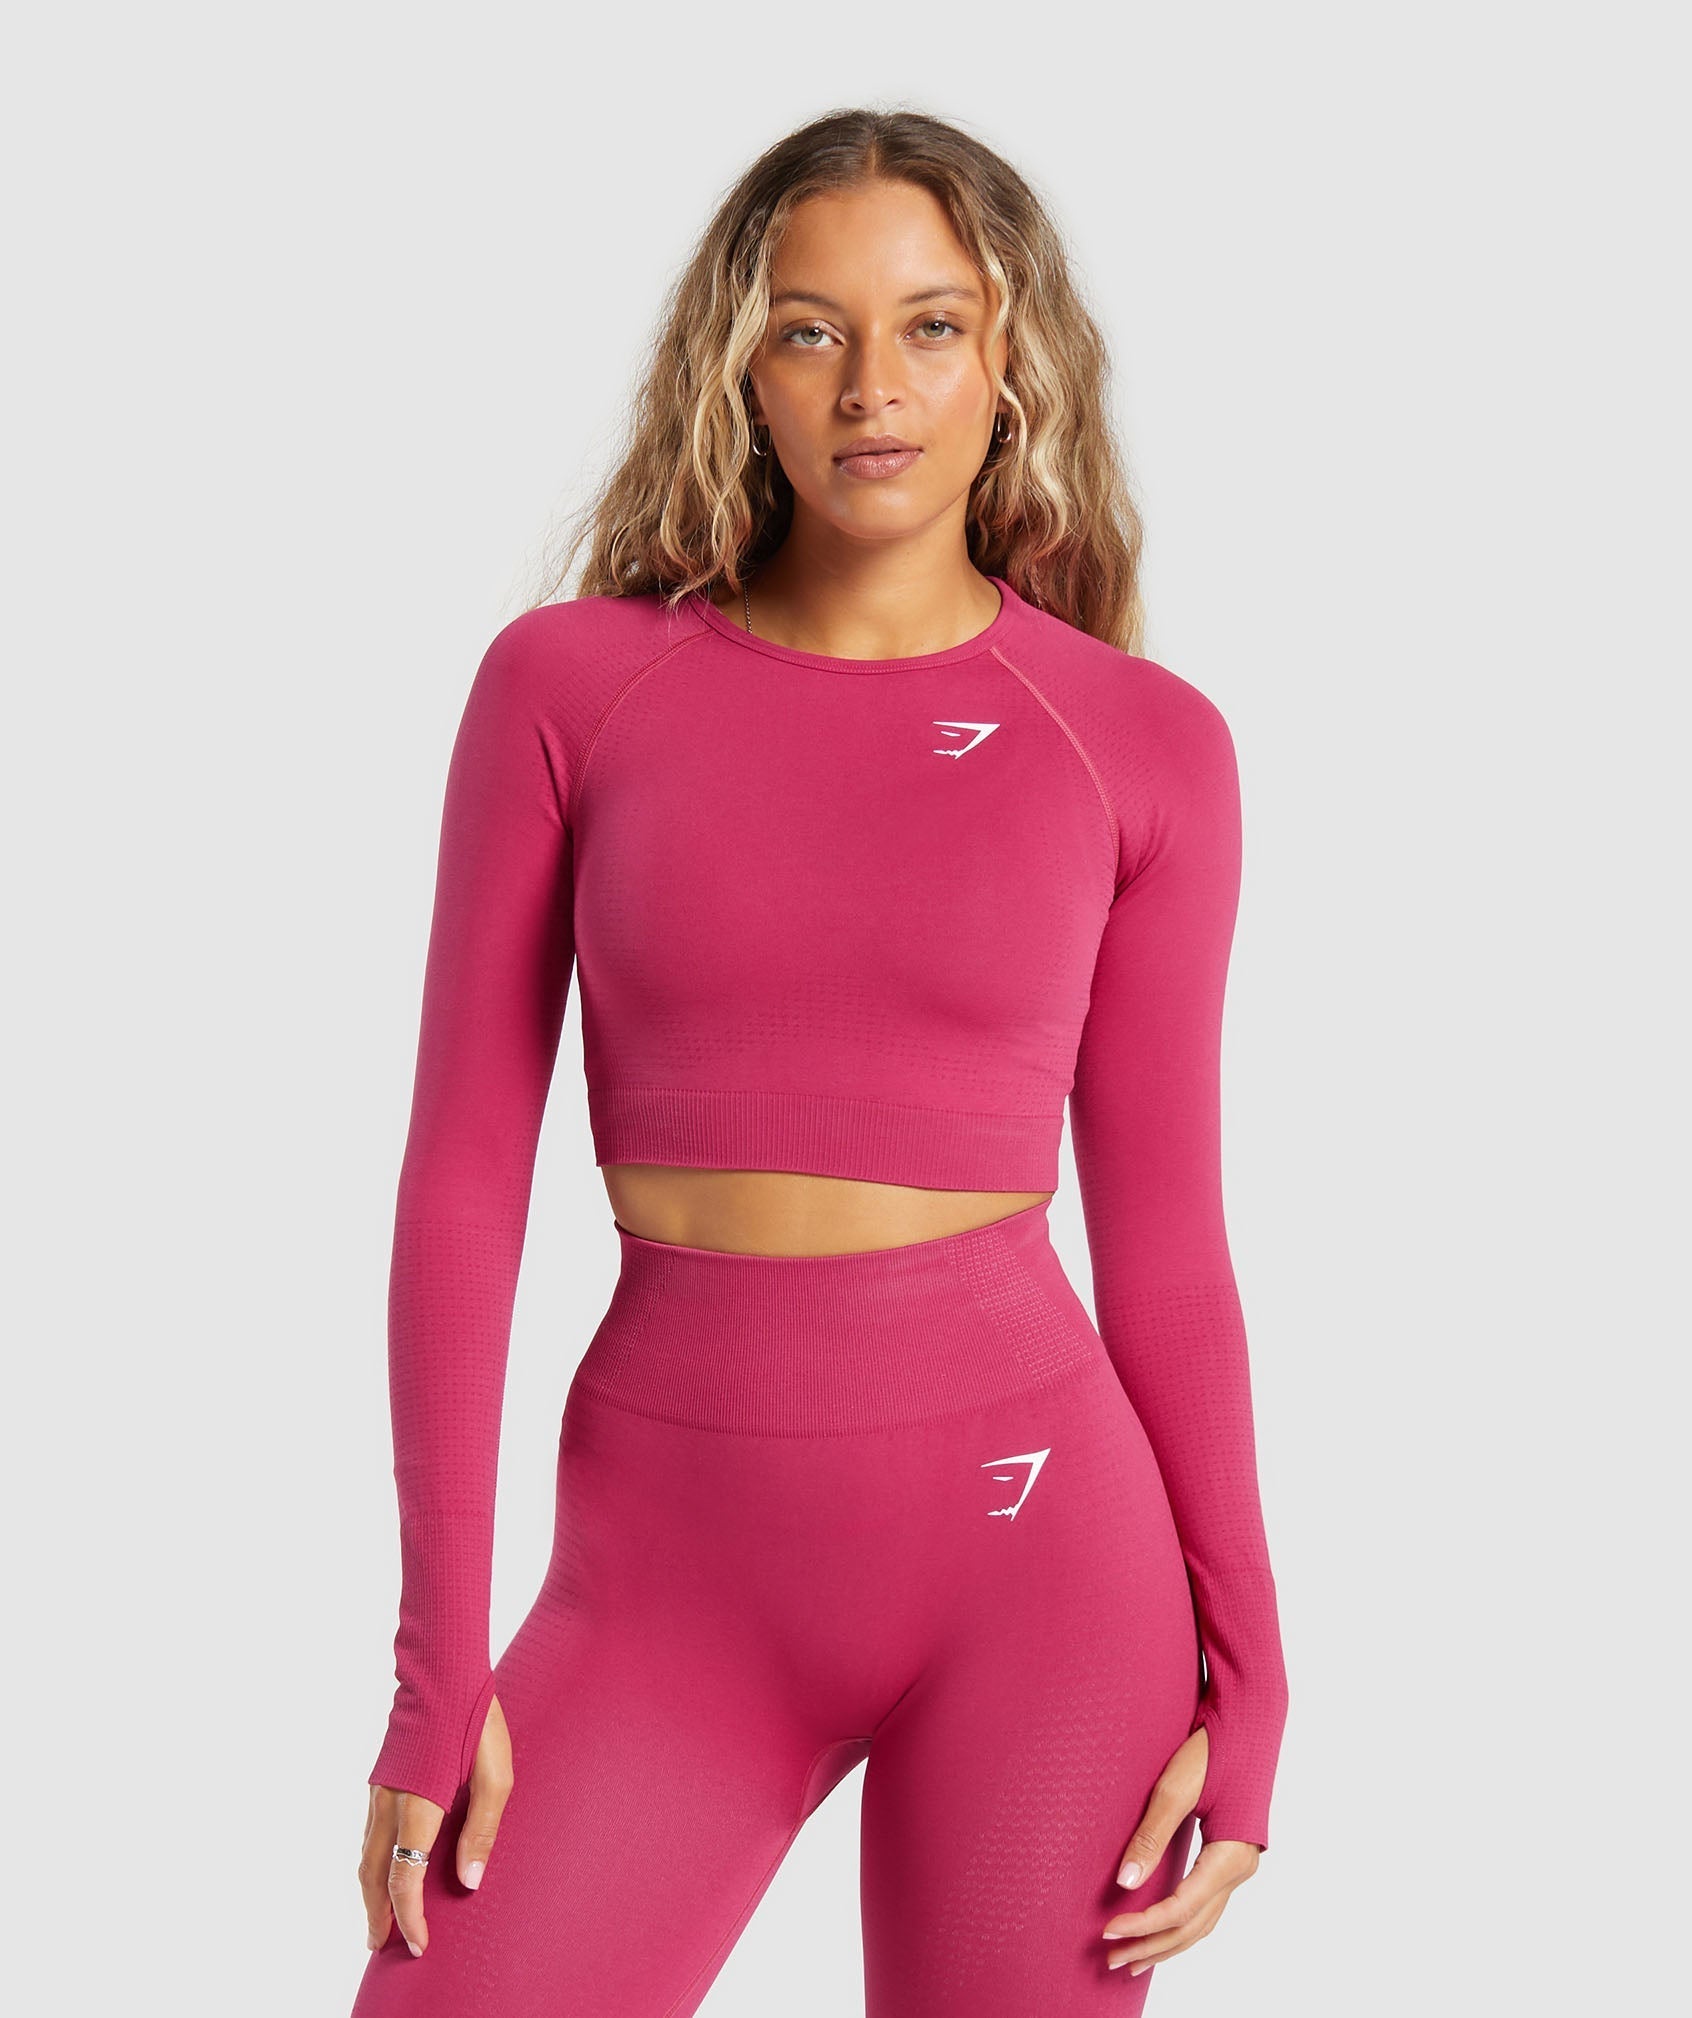 Vital Seamless 2.0 Crop Top in Vintage Pink/Marl is out of stock